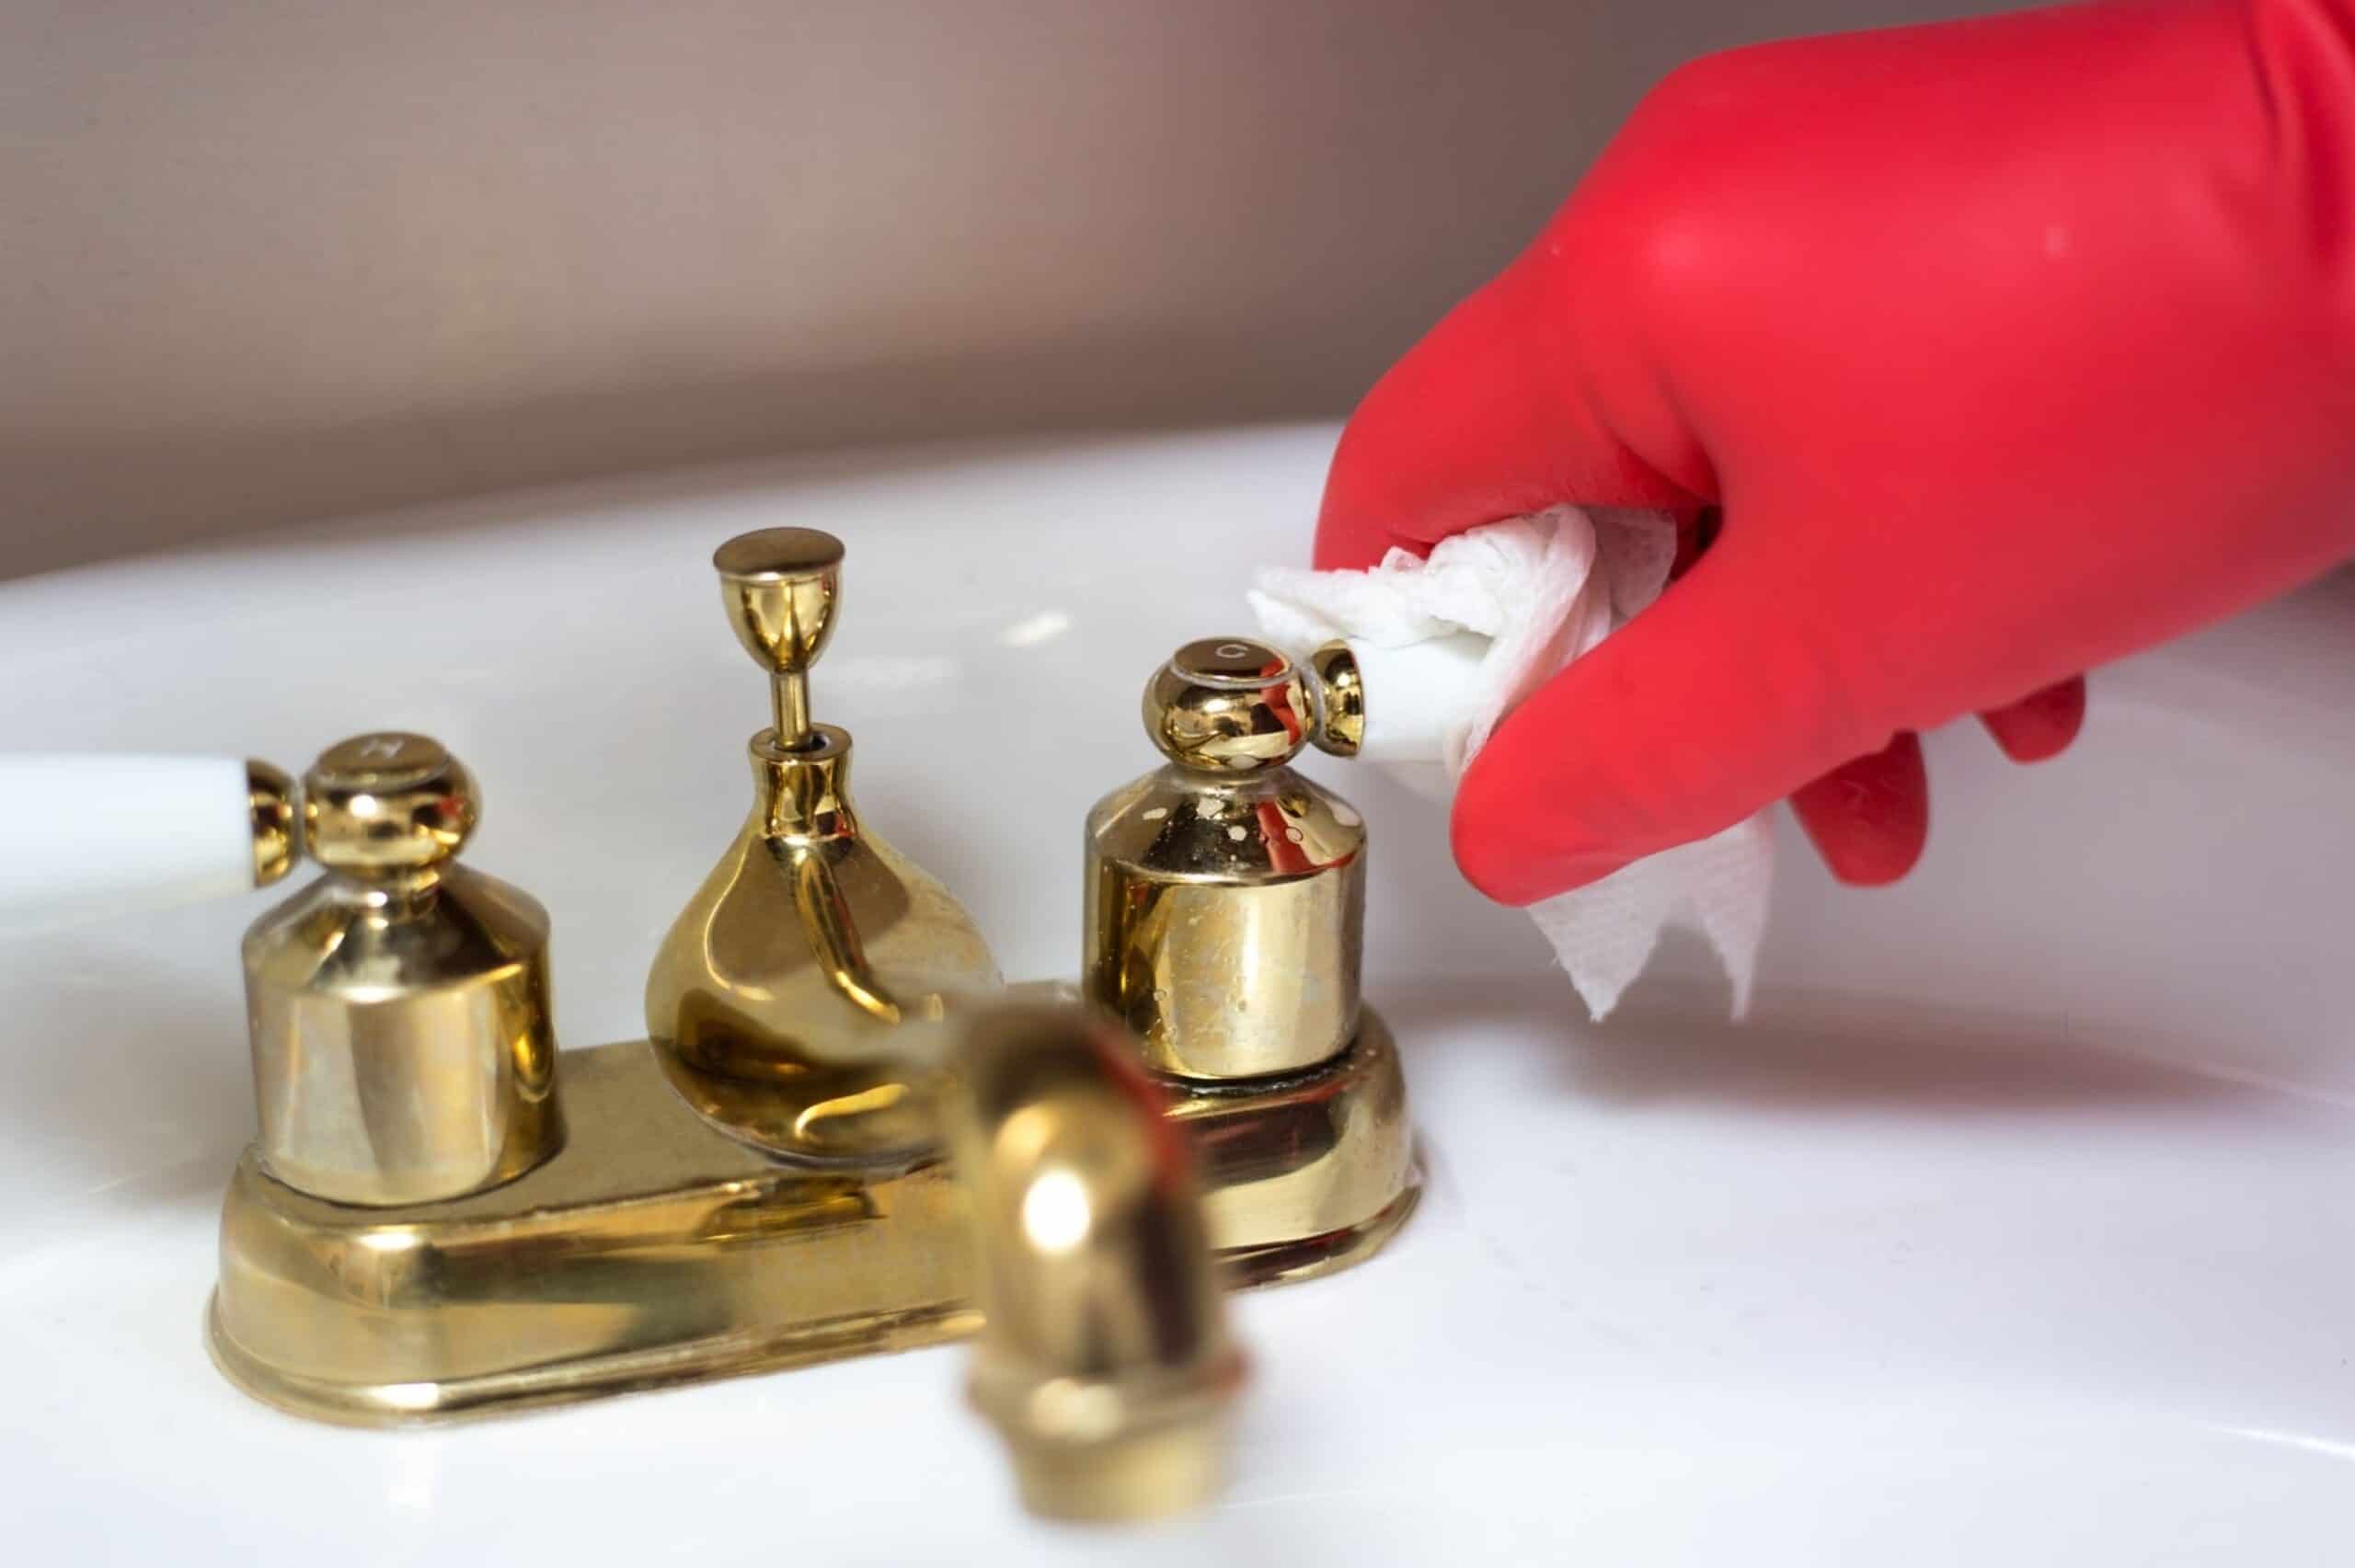 How to Clean and Restore Brass Tidyhere Image of a Hand Cleaning a Brass Faucet